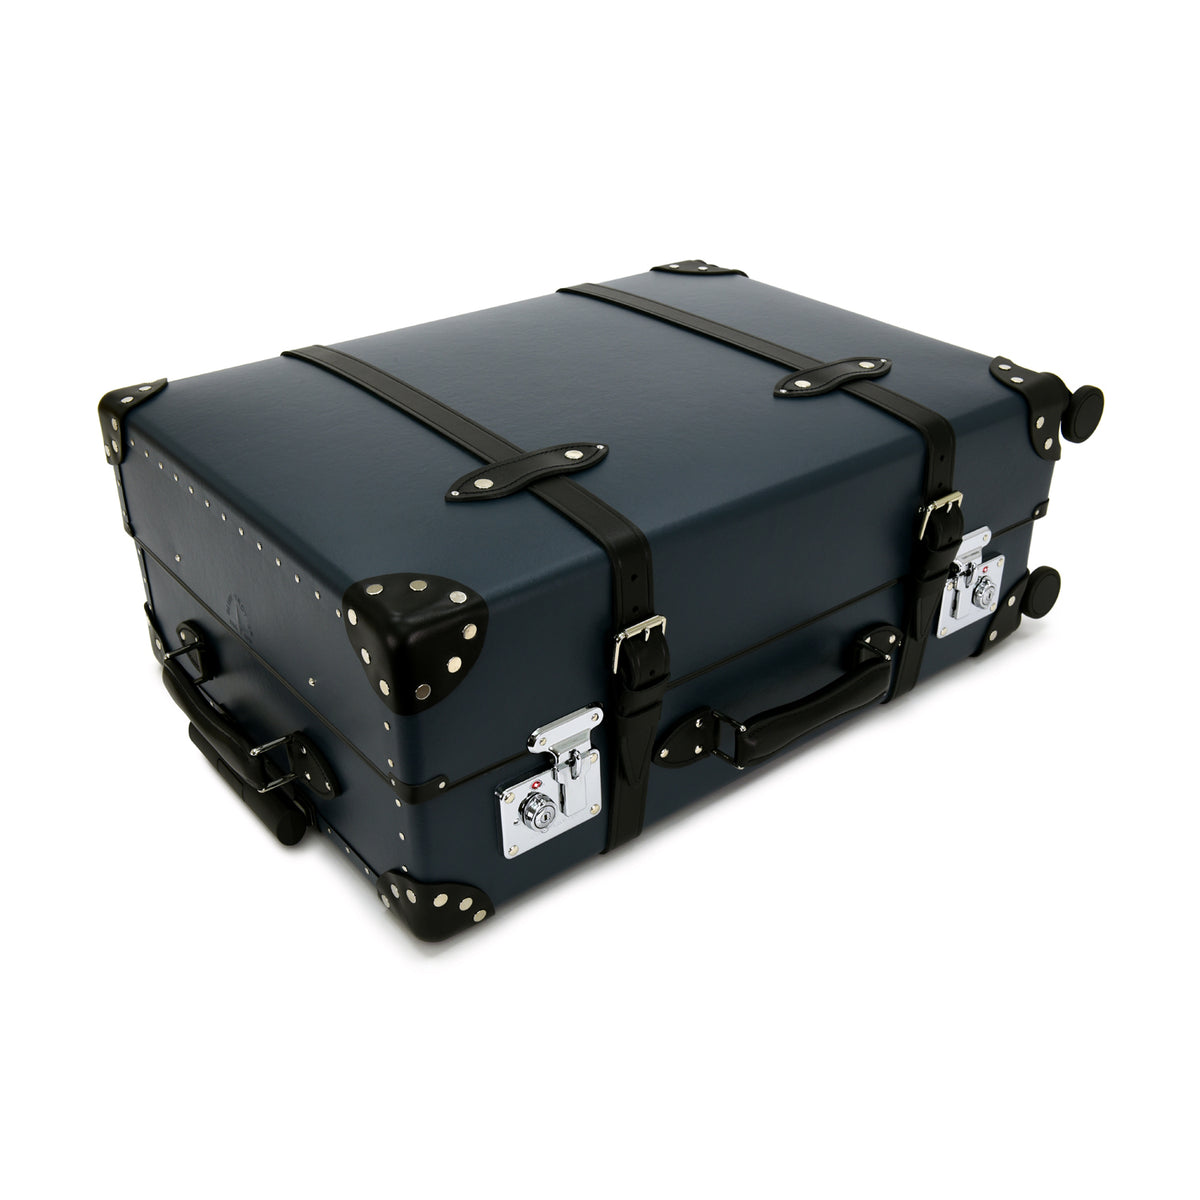 James Bond Dr. No Navy Check-In Trolley Case - 60th Anniversary Edition - By Globe-Trotter